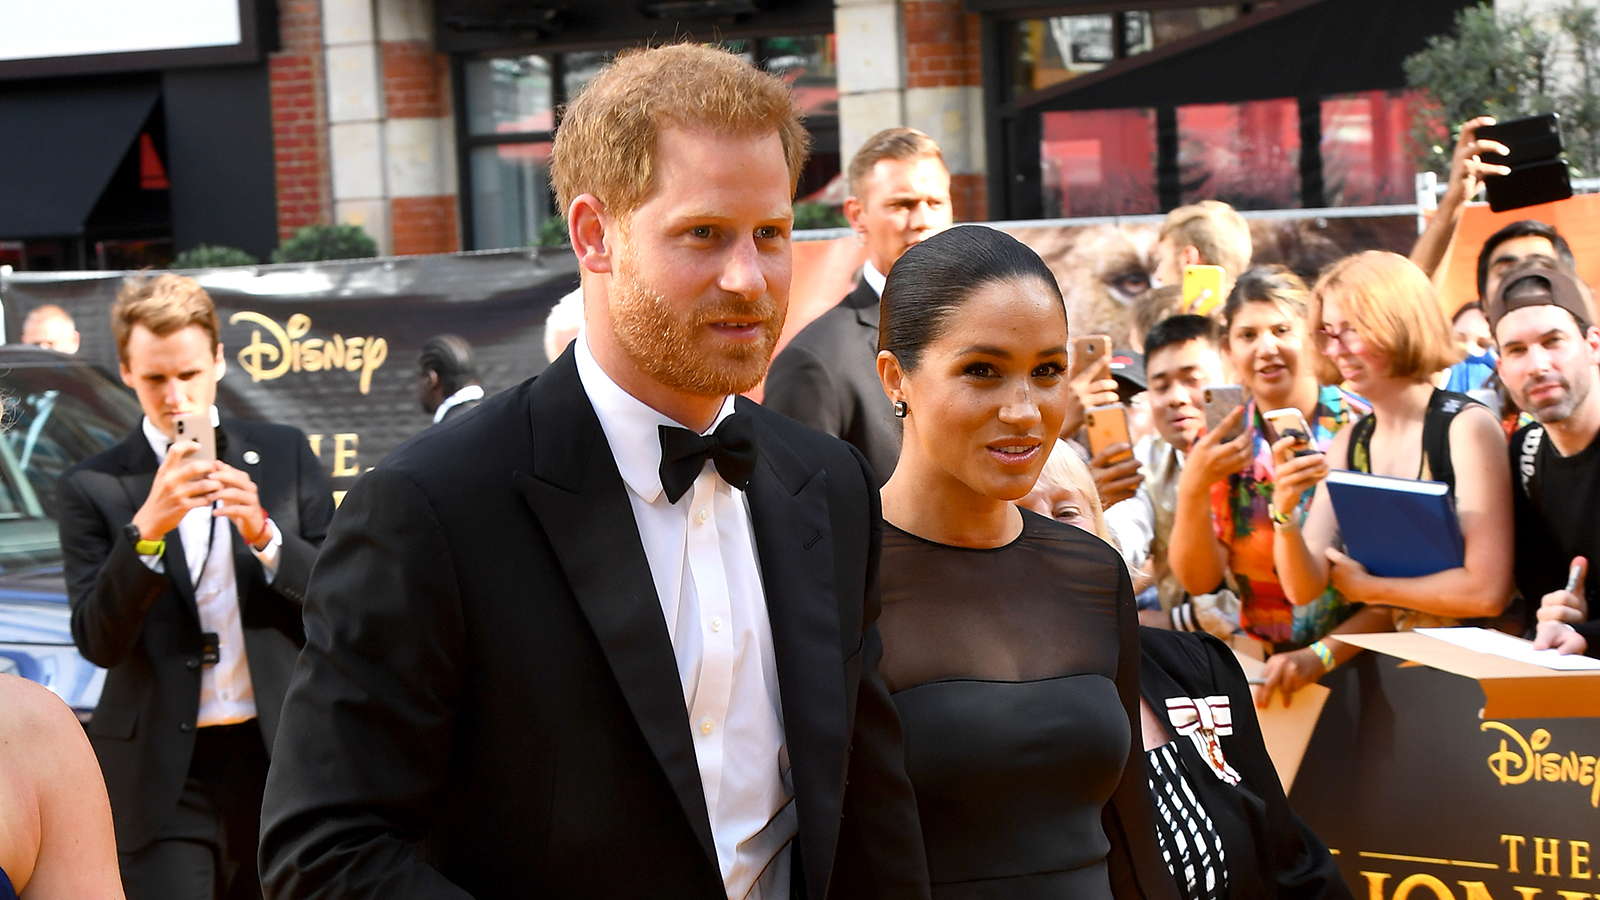 Fans furious at Meghan Markle and Prince Harry's birthday wish to